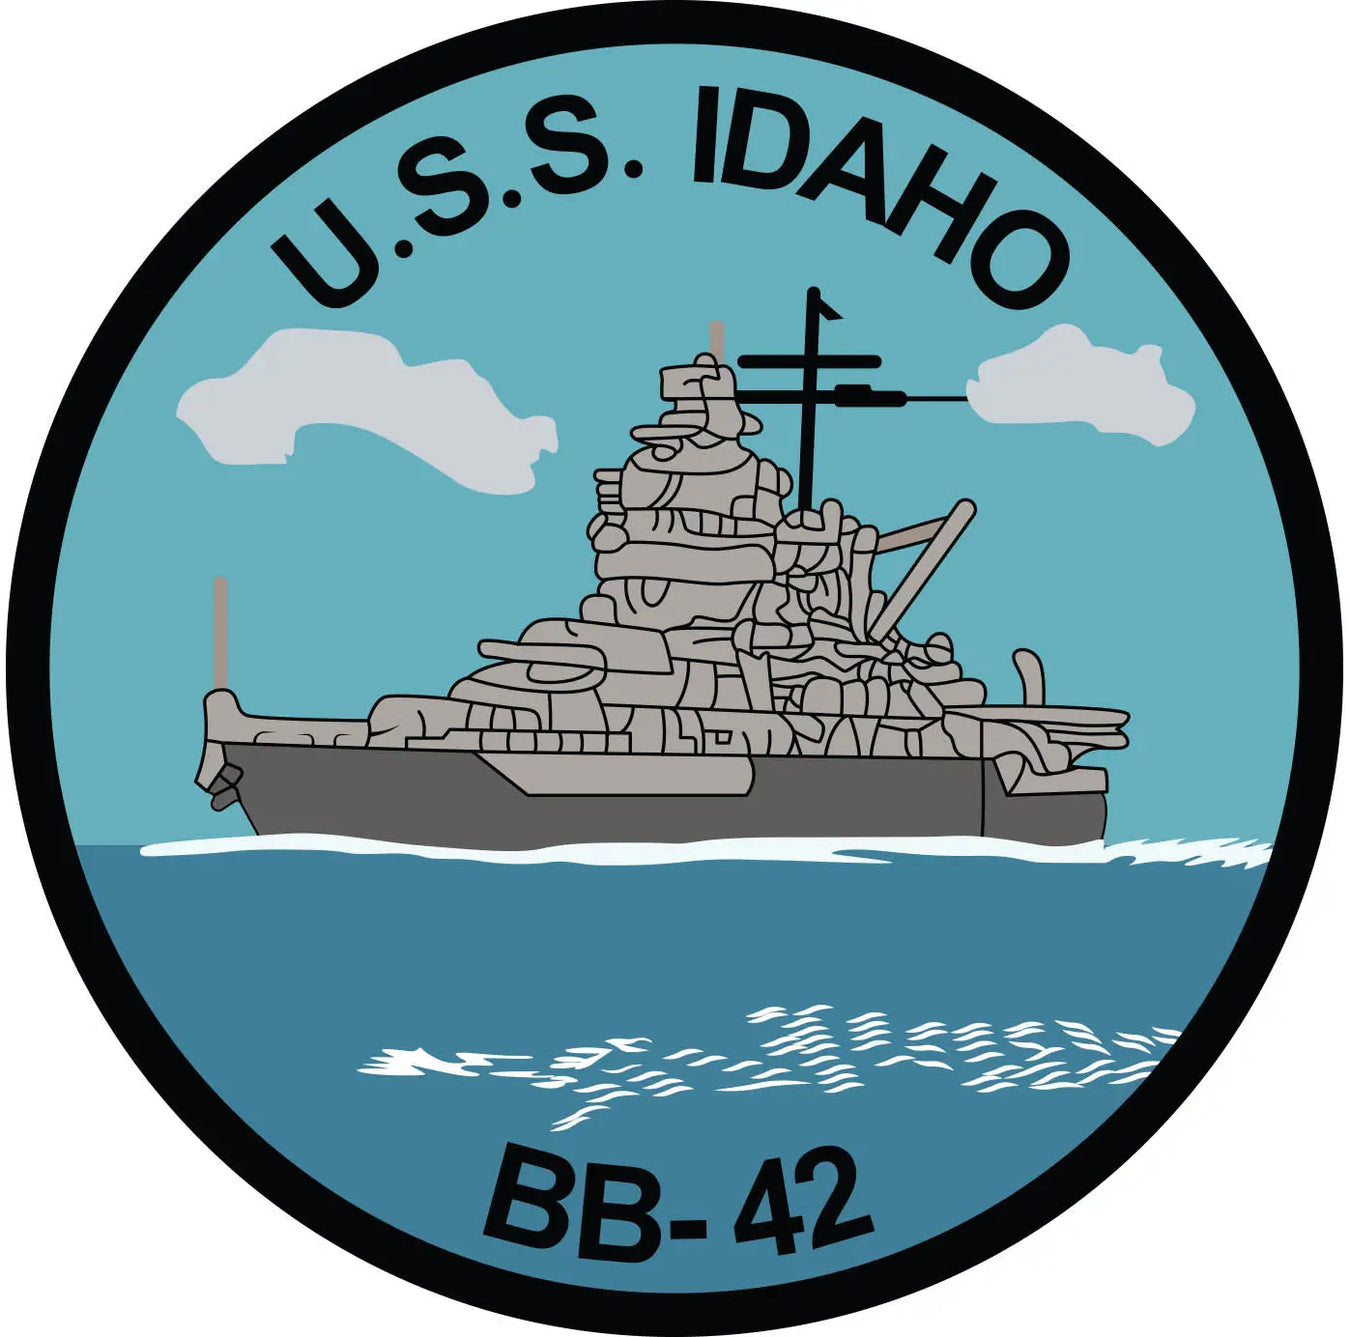 USS Idaho (BB-42) Merchandise - Shop T-Shirts, hoodies, patches, pins, flags, decals, hats and more.